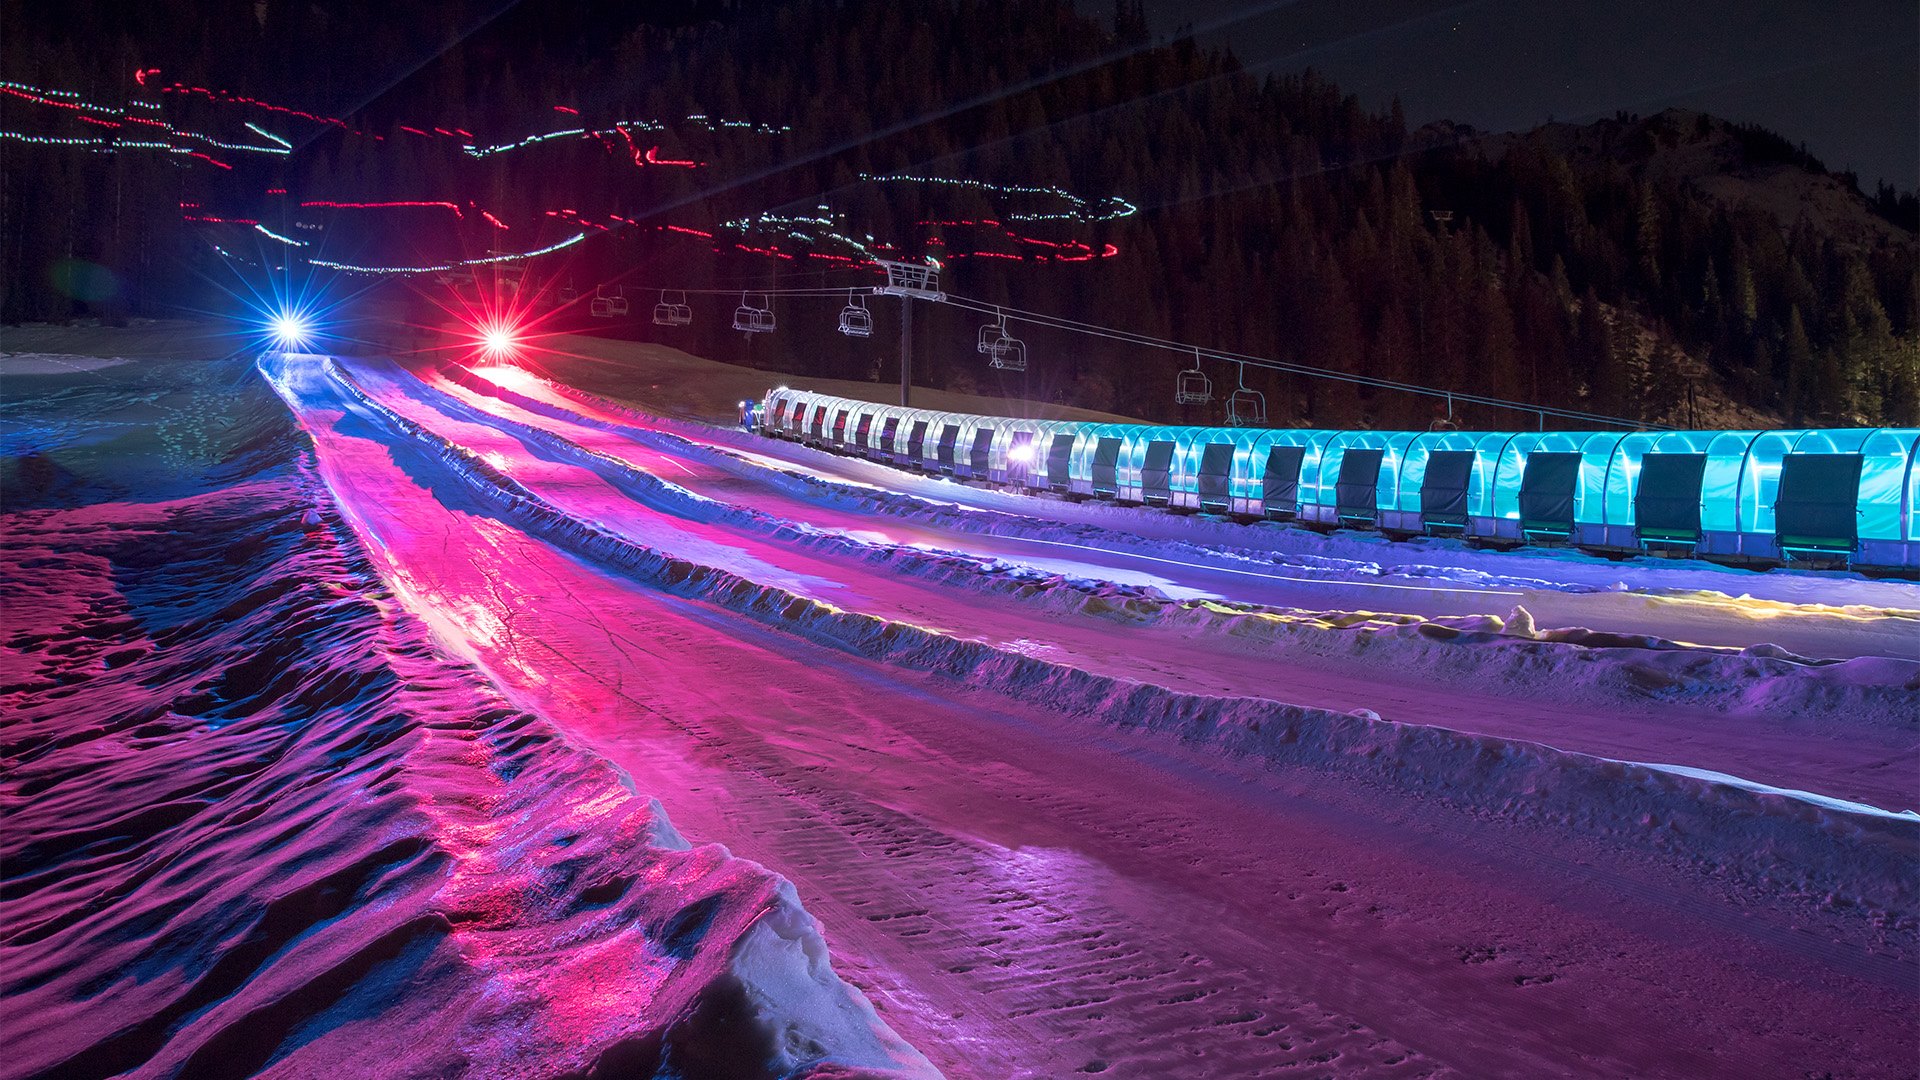 Try The Ultimate Nighttime Adventure With Disco Tubing At Squaw Valley Reso...